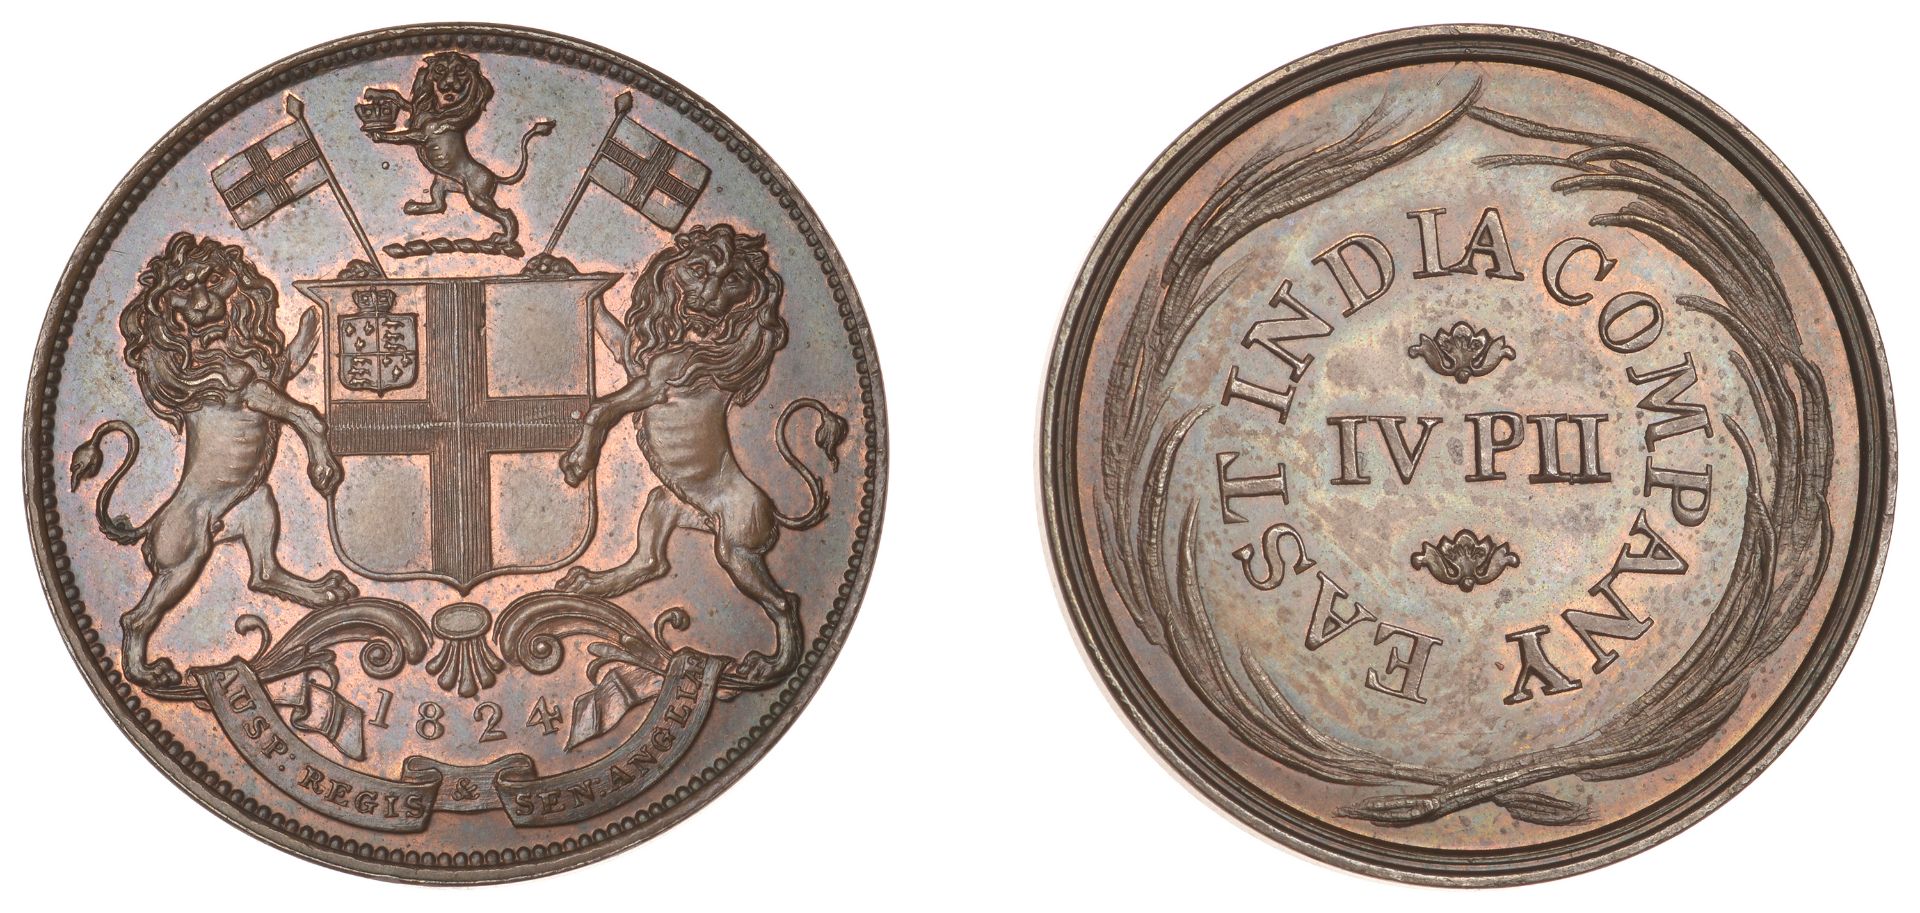 East India Company, Madras Presidency, Later coinages 1812-35, Royal Mint, London, copper Pa...